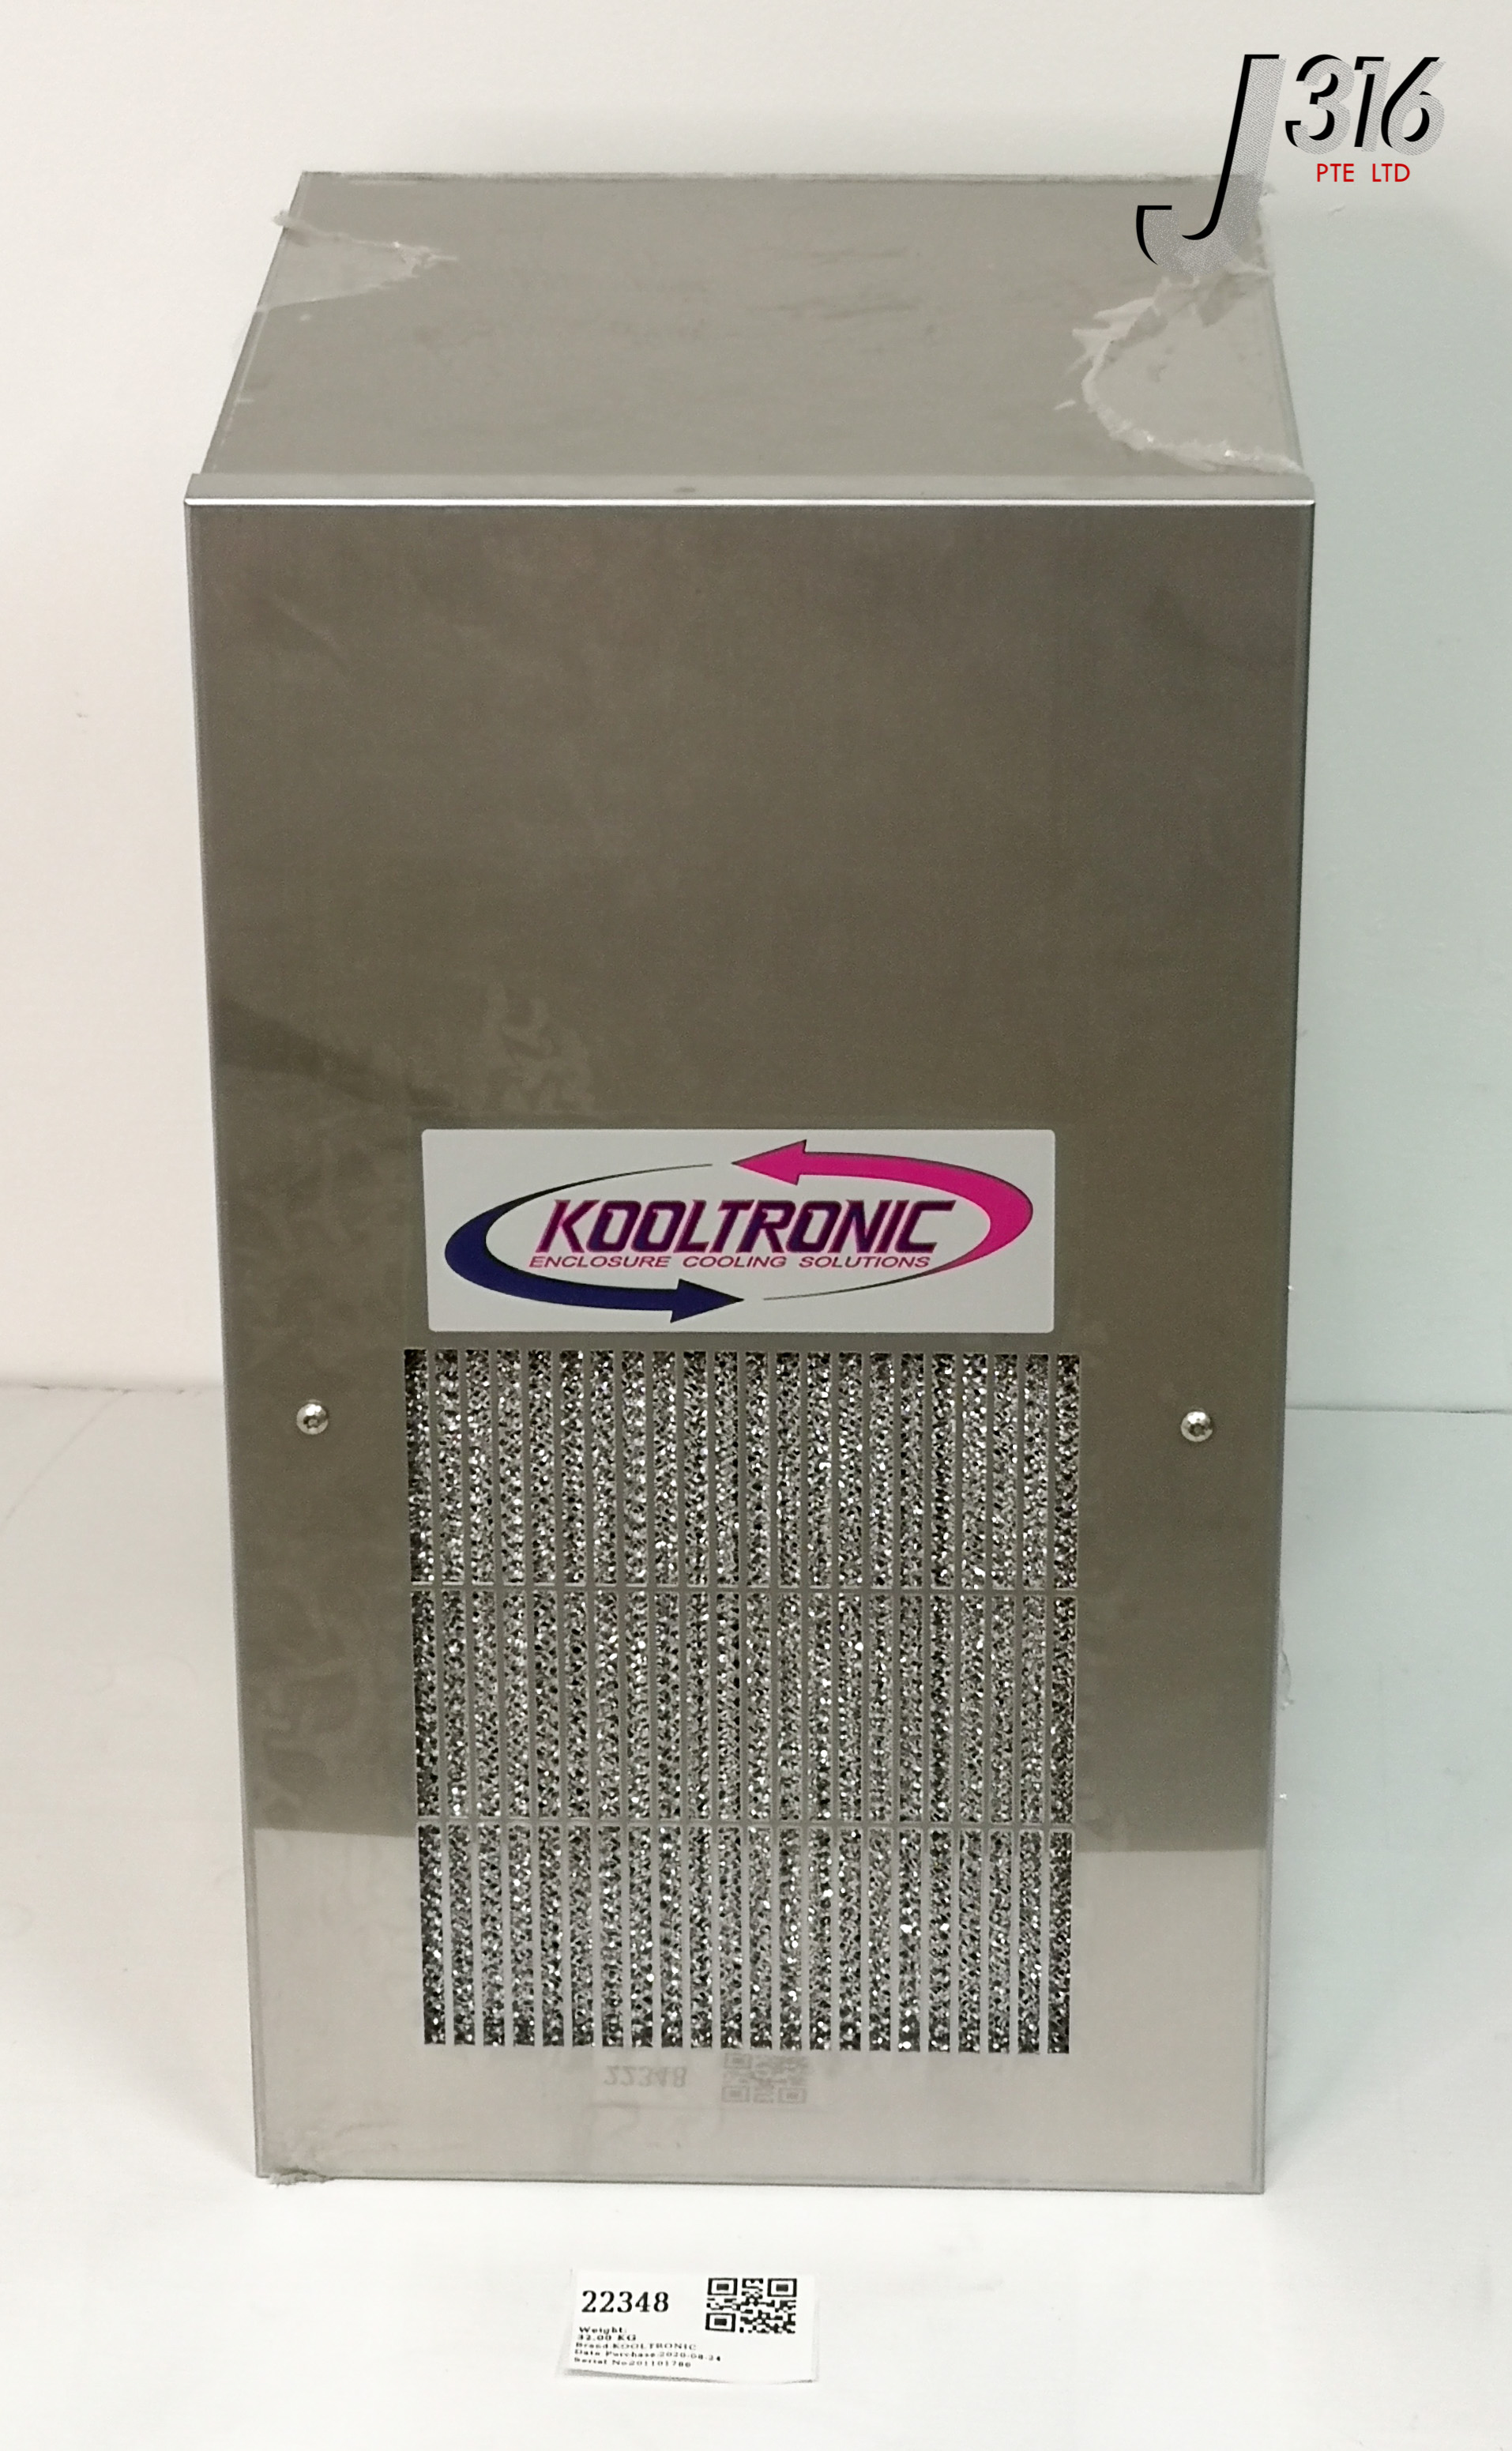 22348 KOOLTRONIC AIR CONDITIONER, 604521-L5D1-01, 9501F, R134A